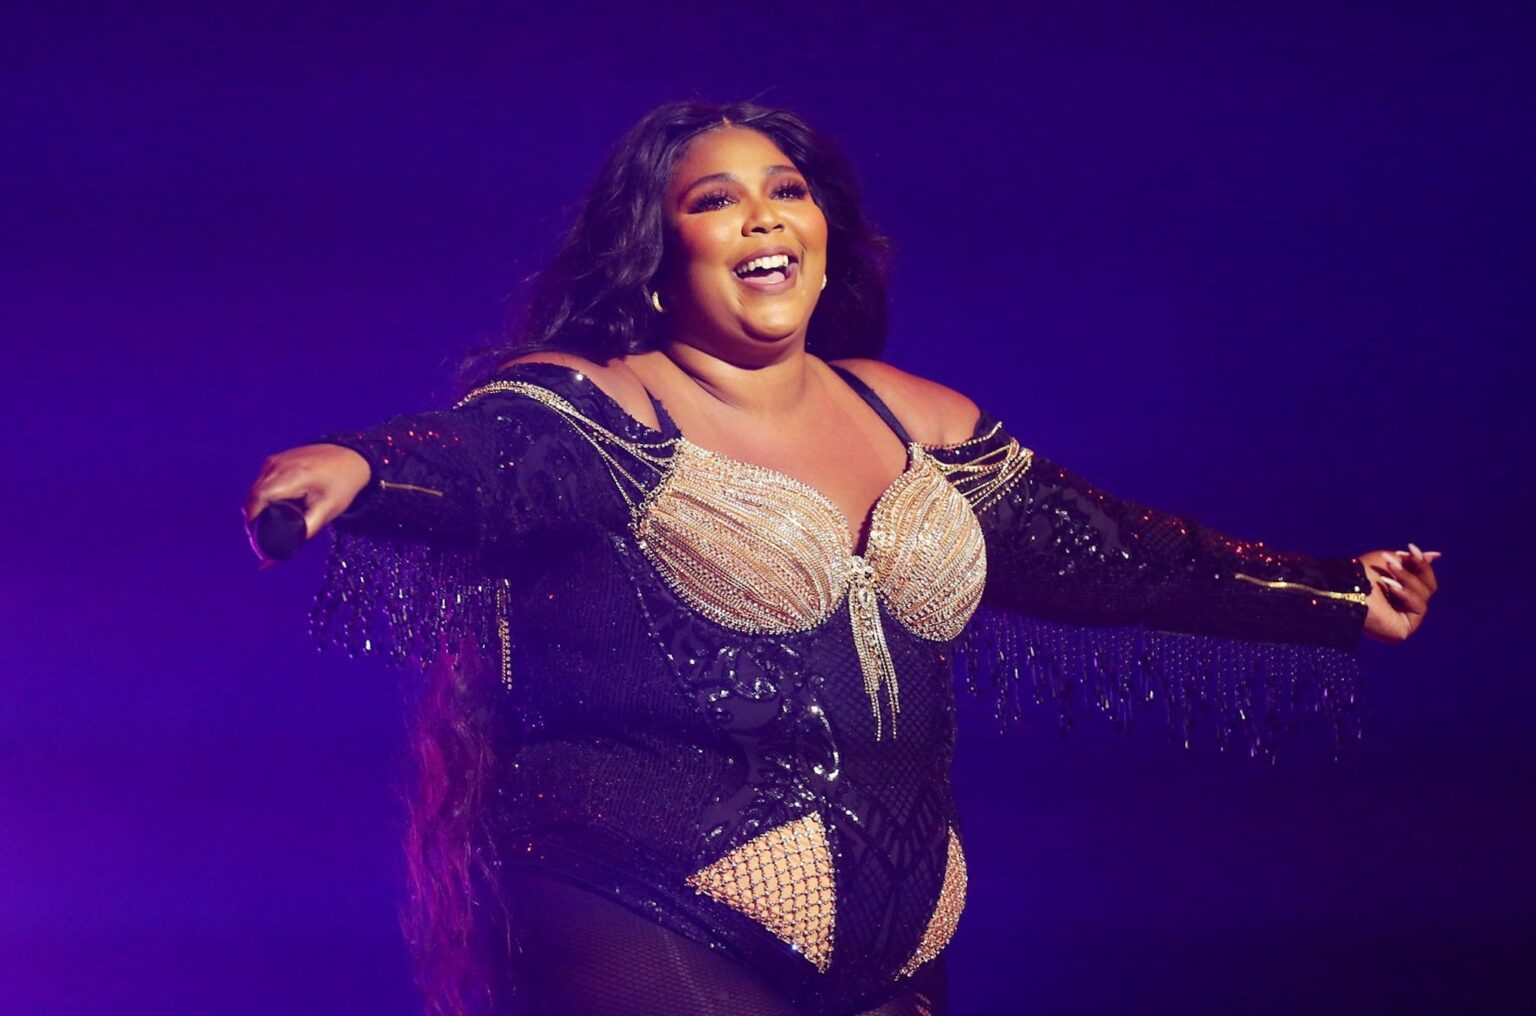 Lizzo dropped a massive single over the weekend and now the haters are coming out. Bust open the story and find out who is saying what about the star.